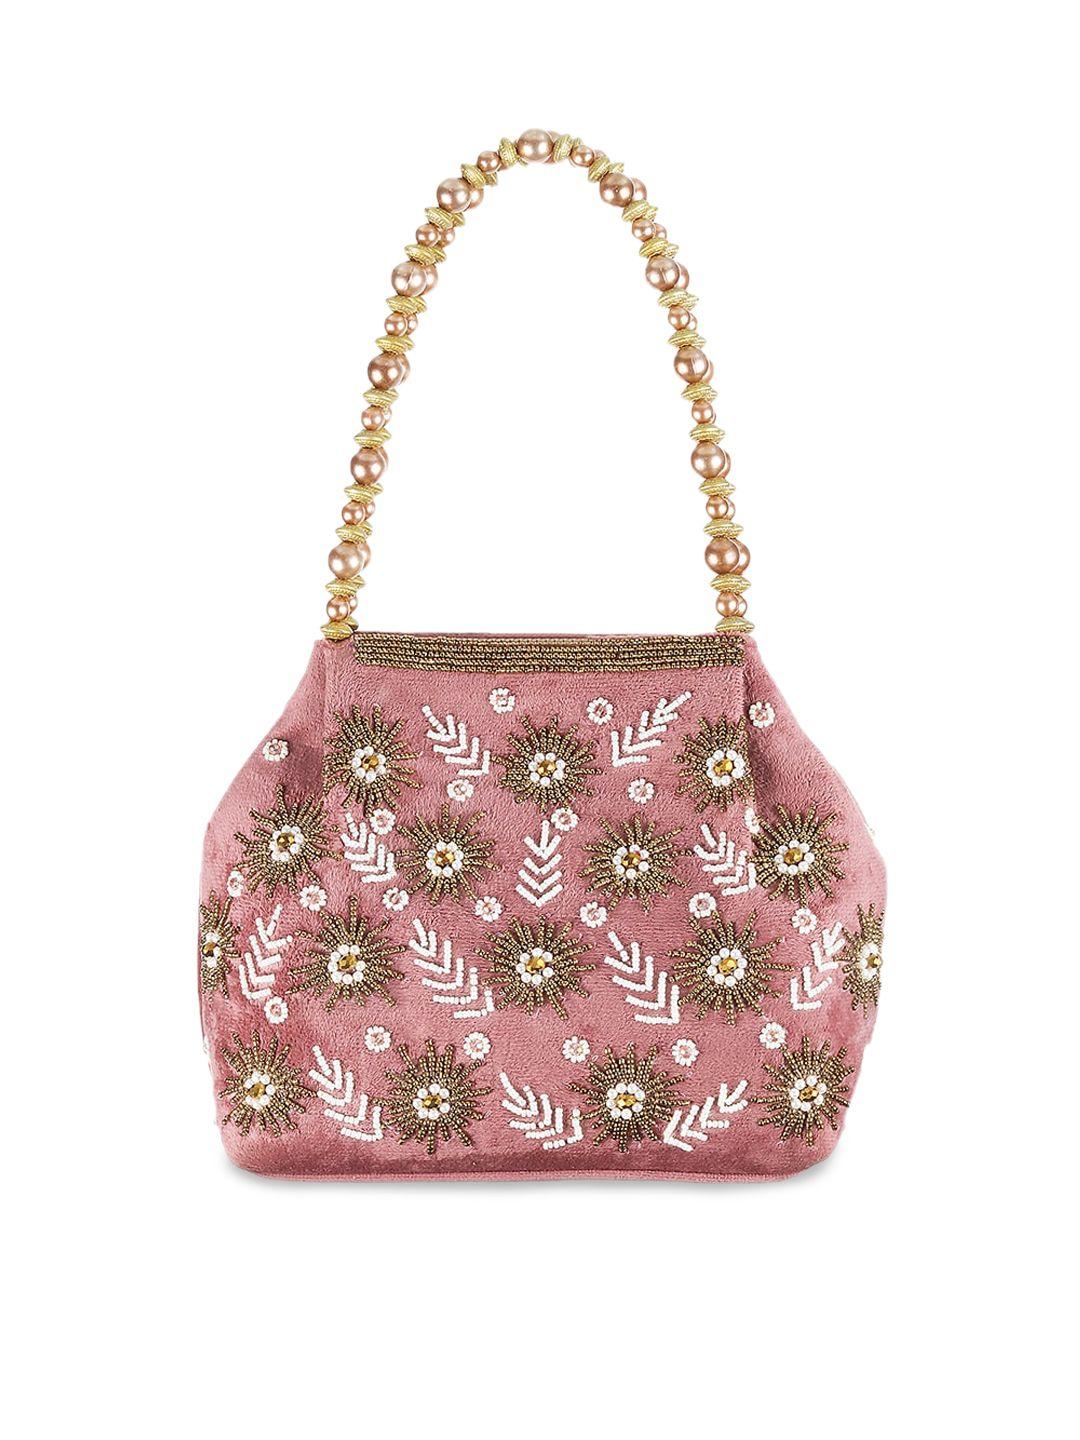 metro floral embroidered structured handheld bag